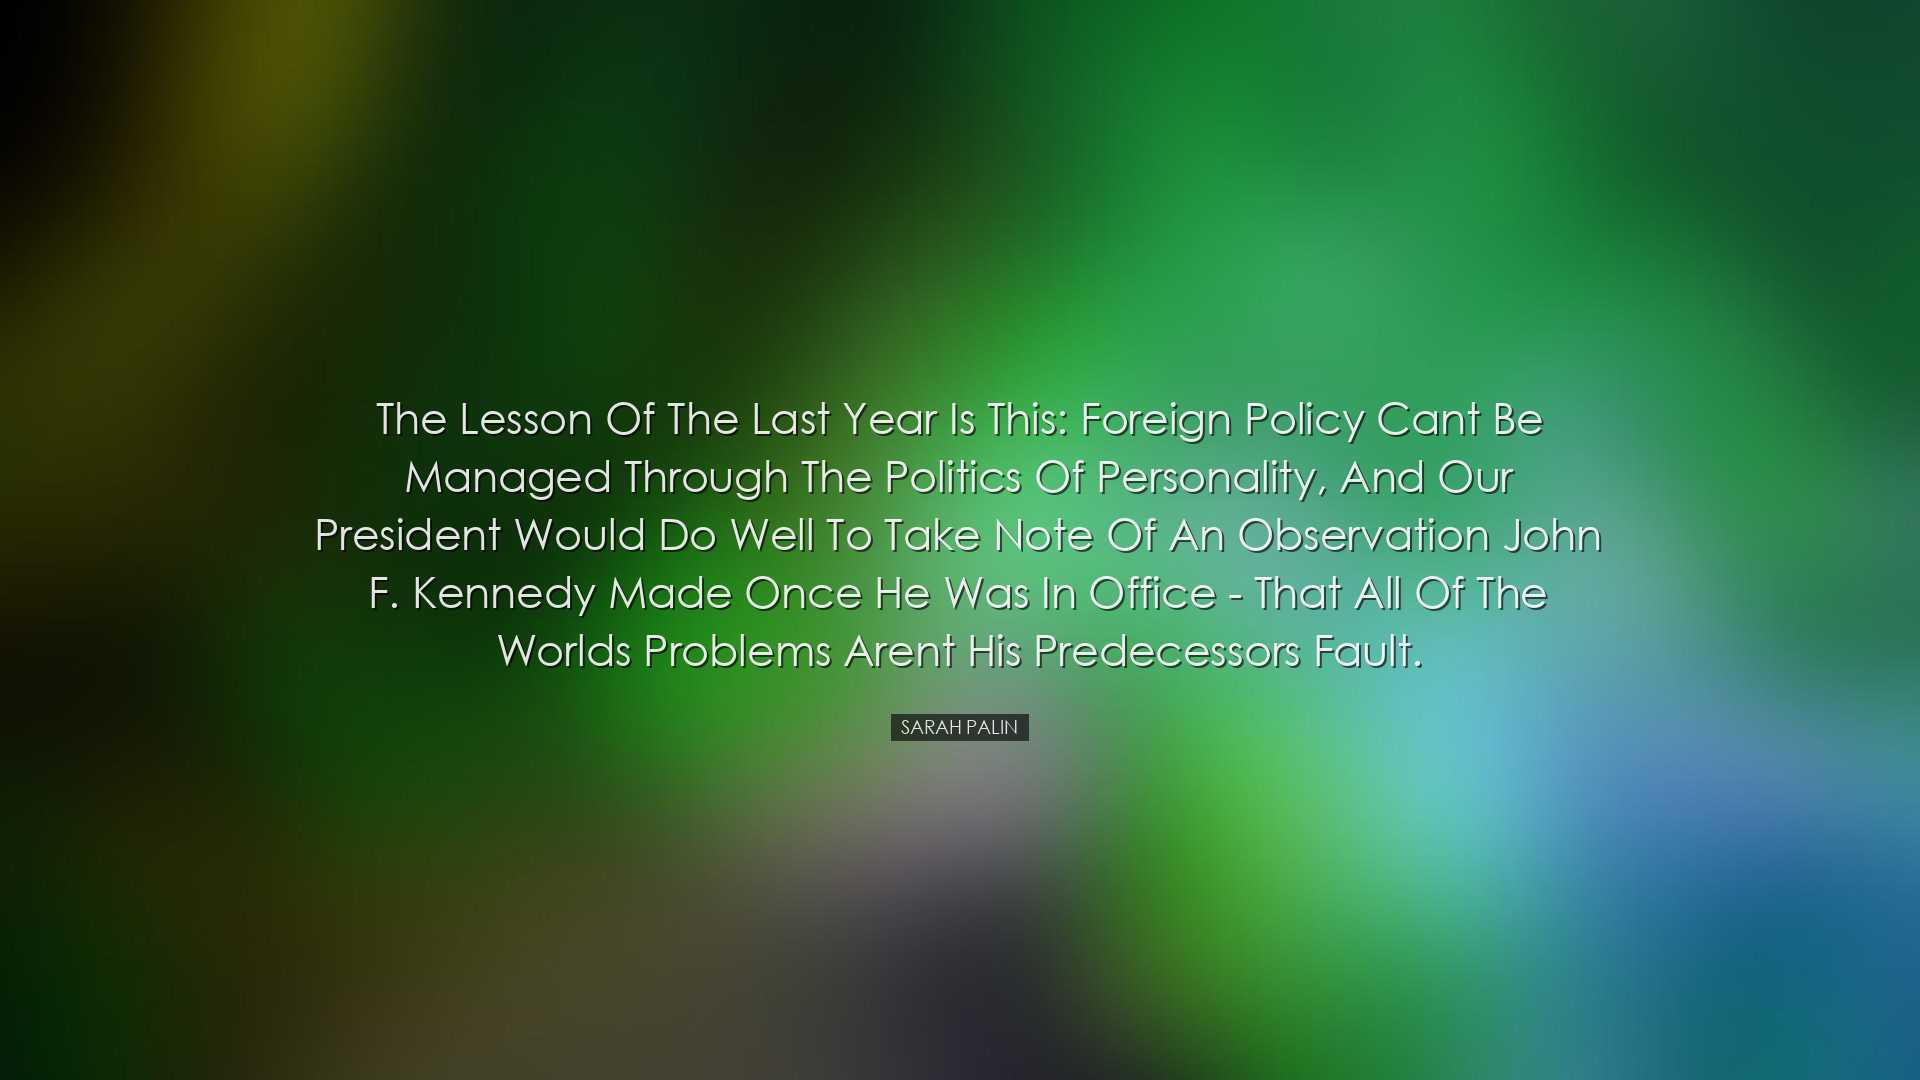 The lesson of the last year is this: foreign policy cant be manage